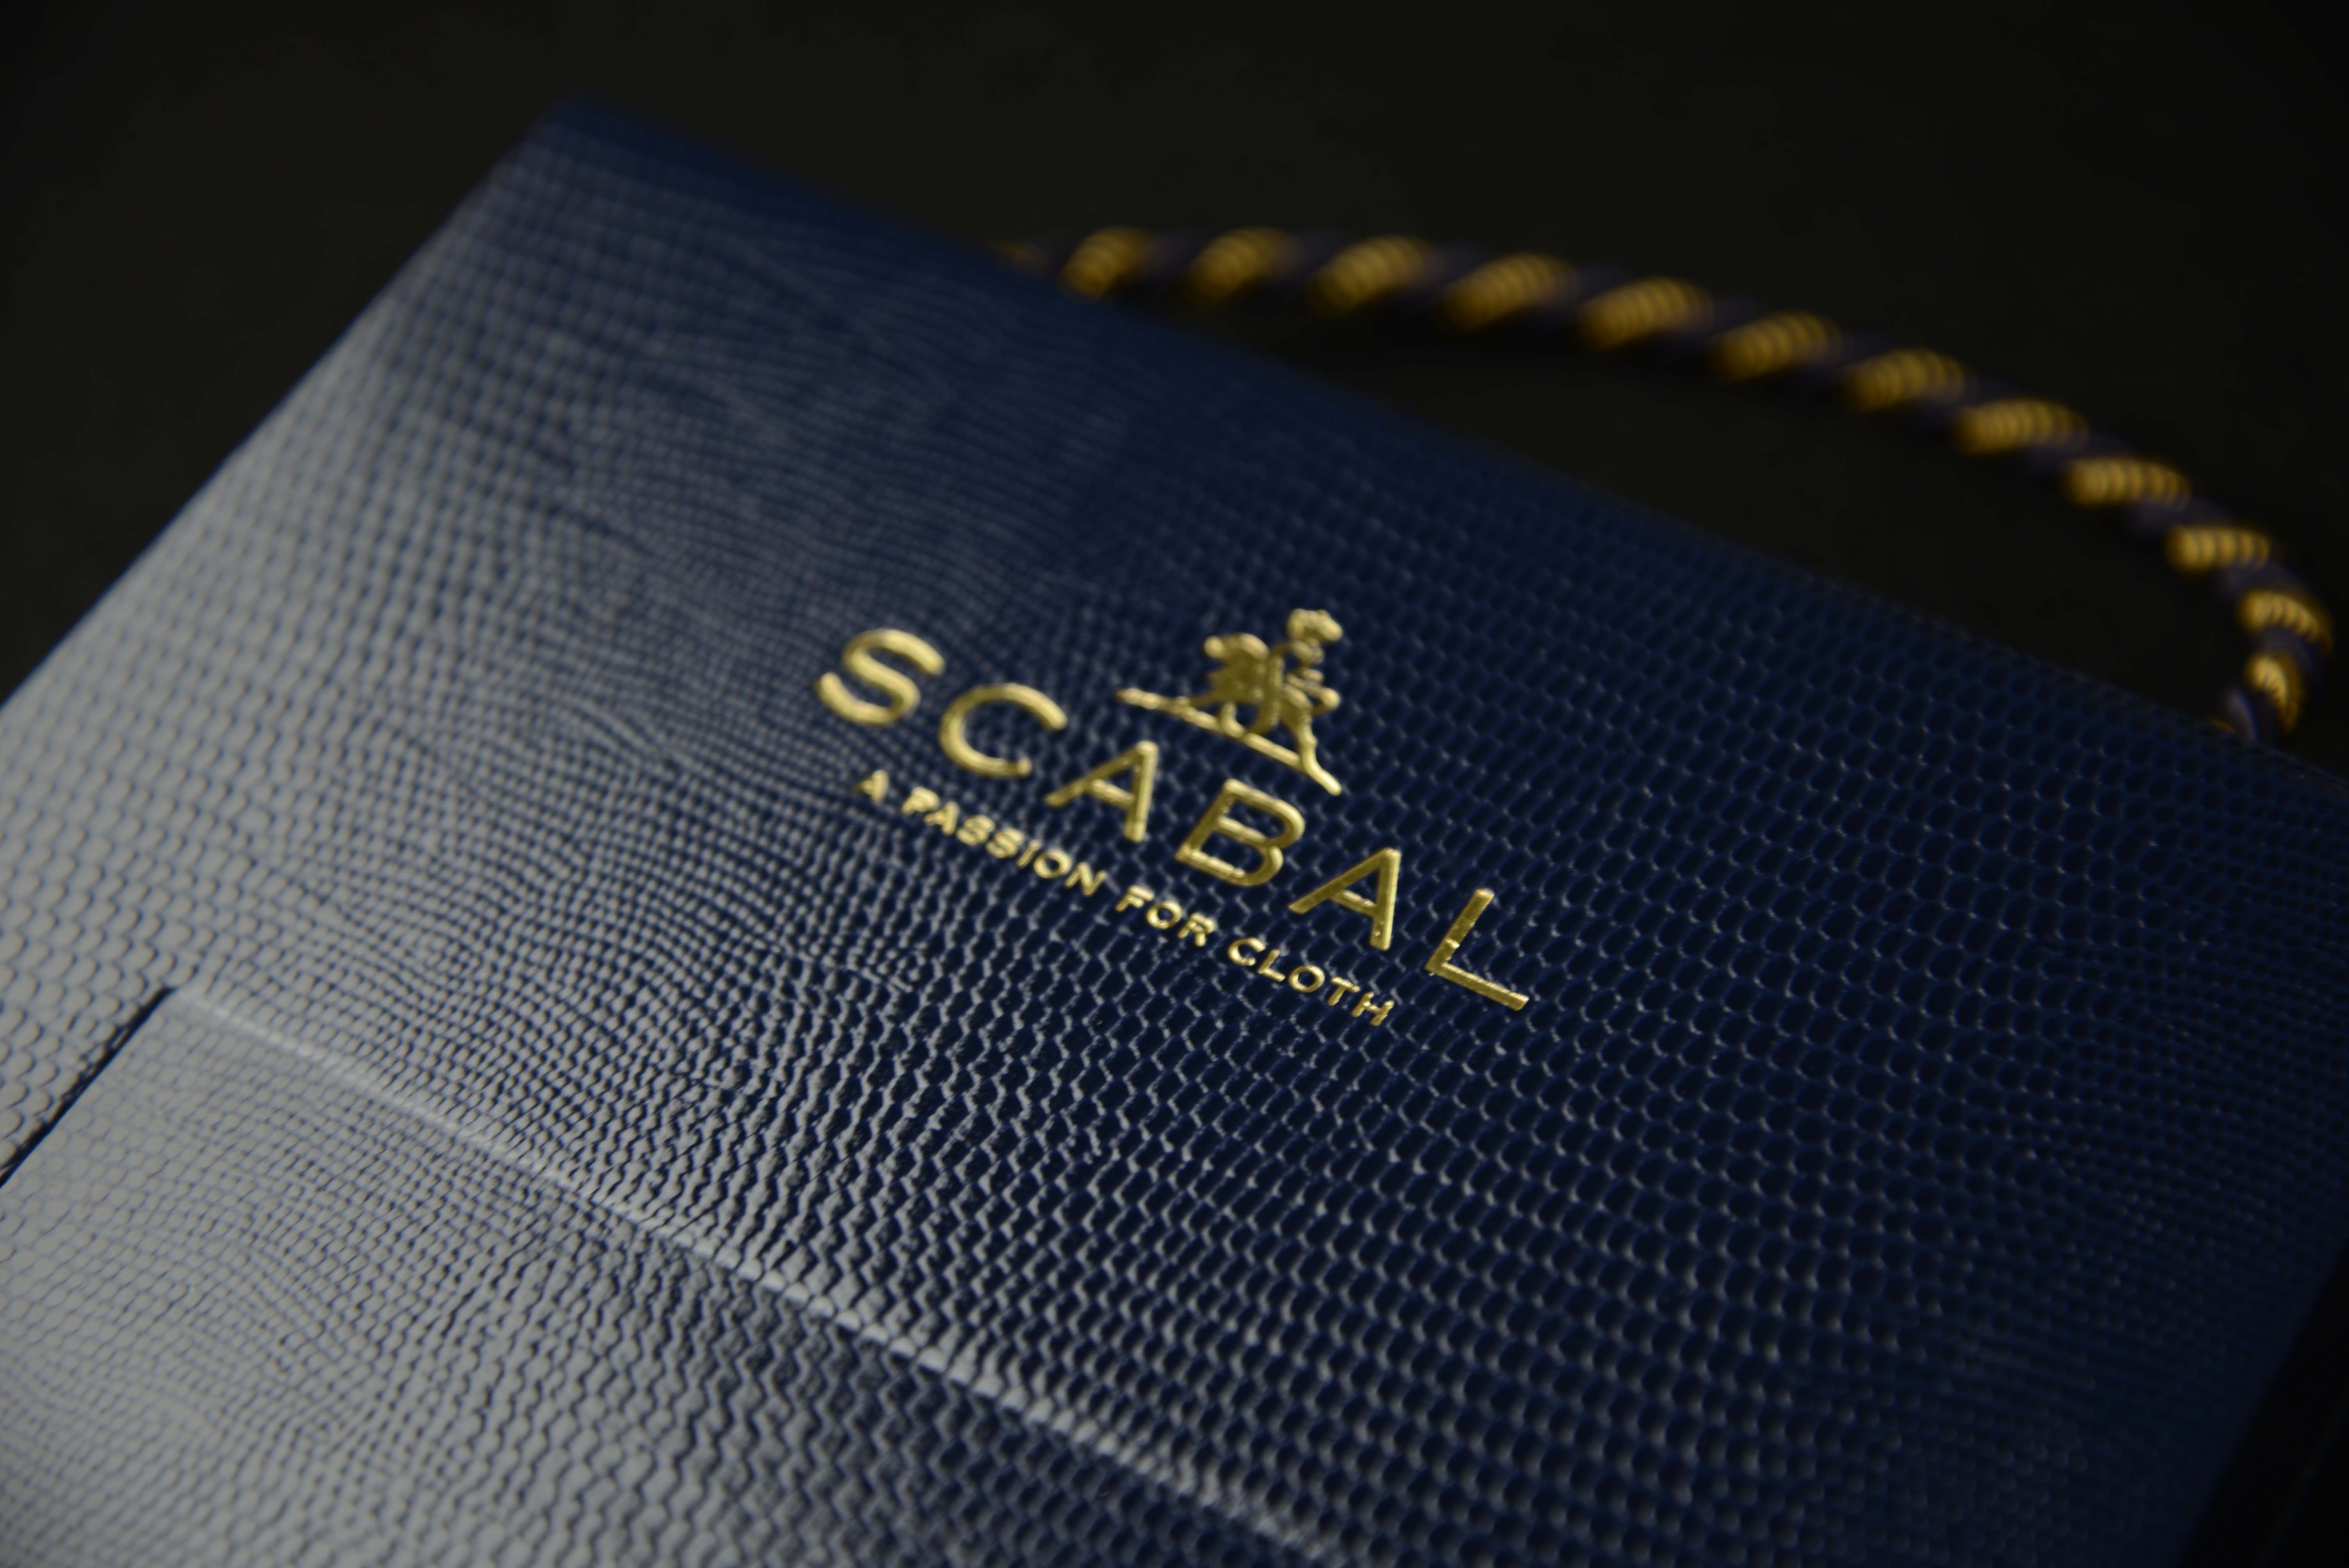 Scabal fabric bunch